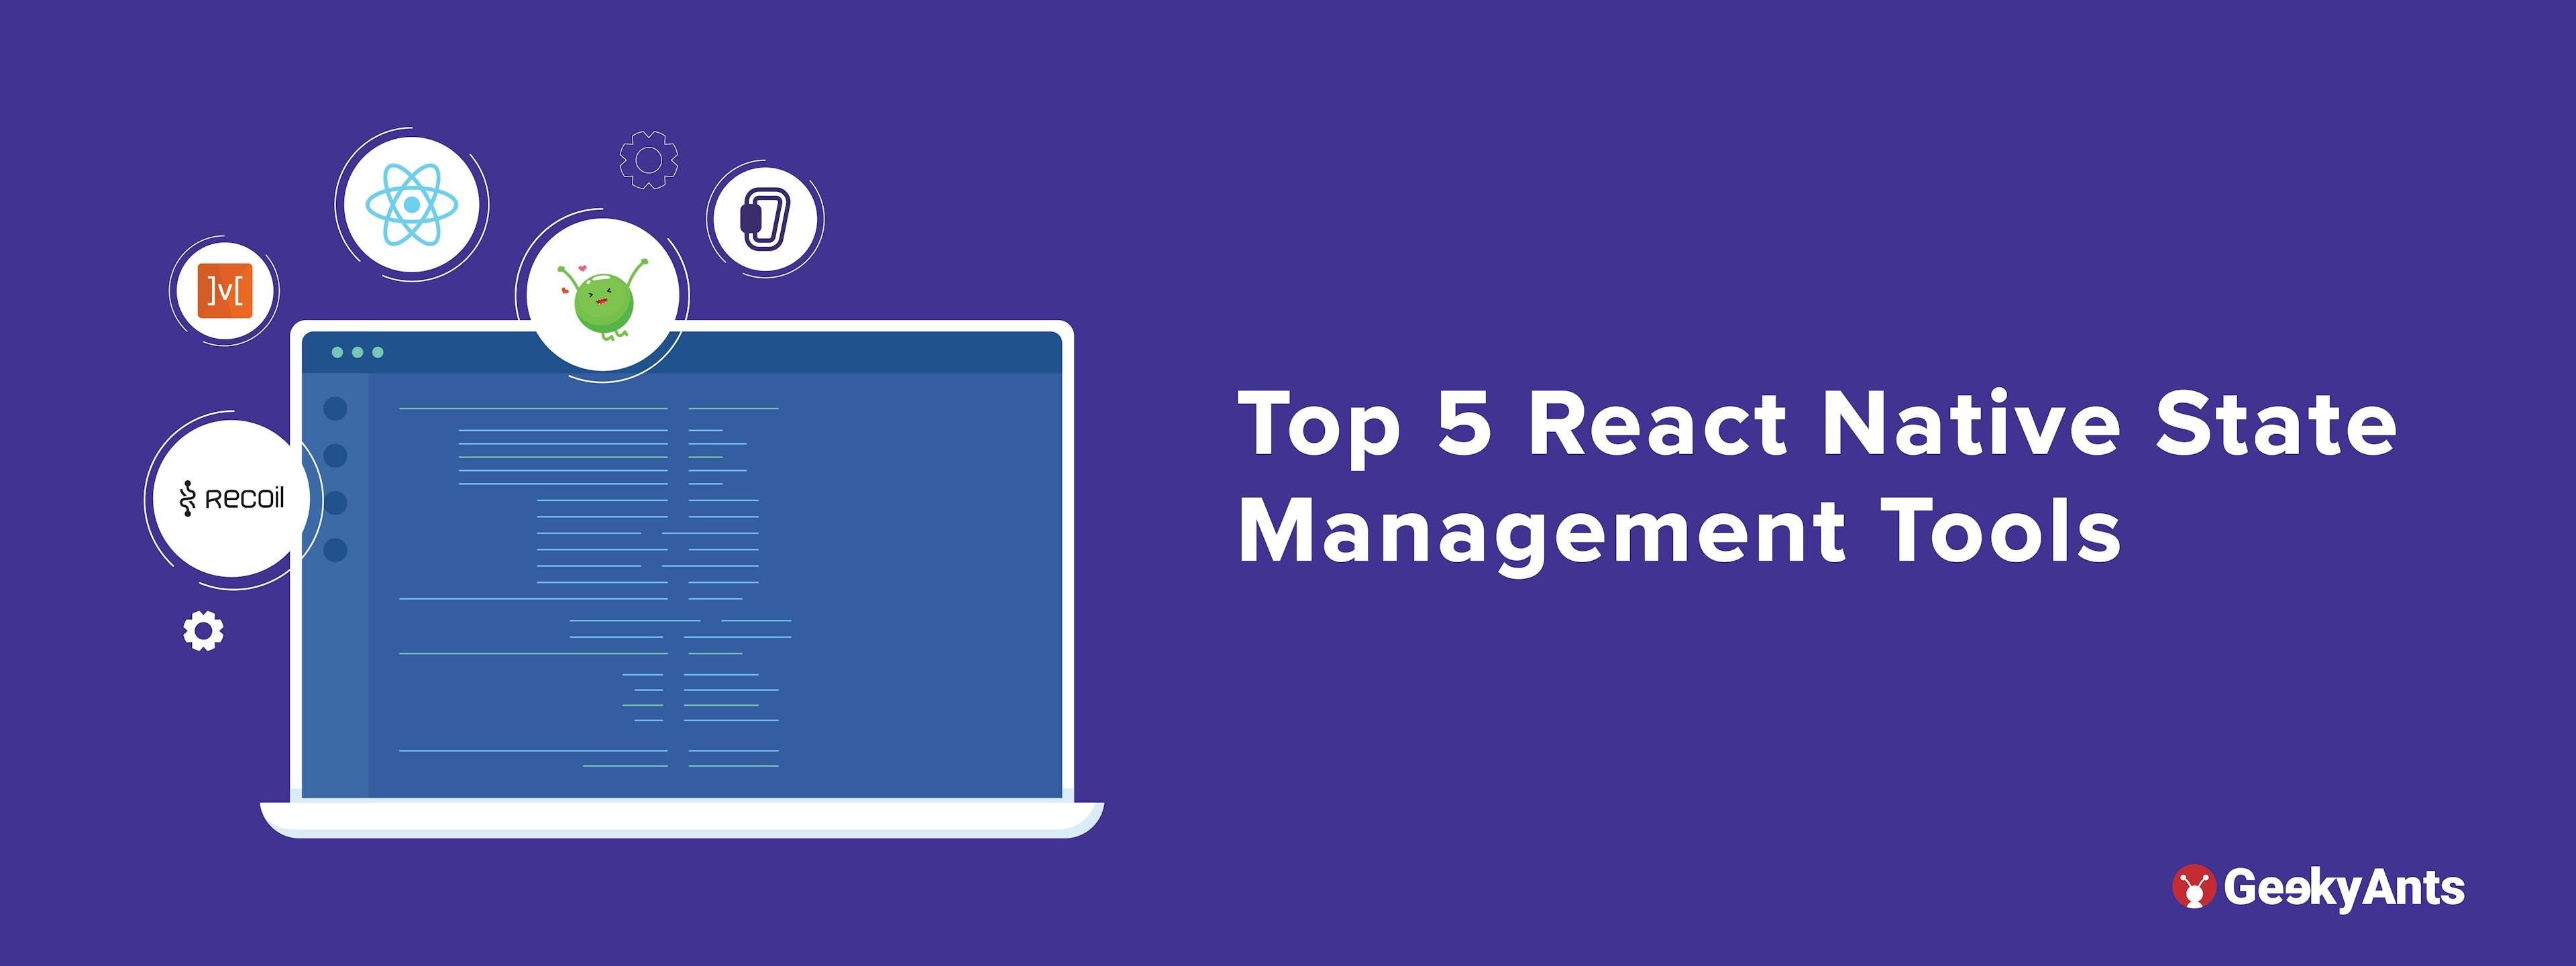 Top 5 React Native State Management Tools